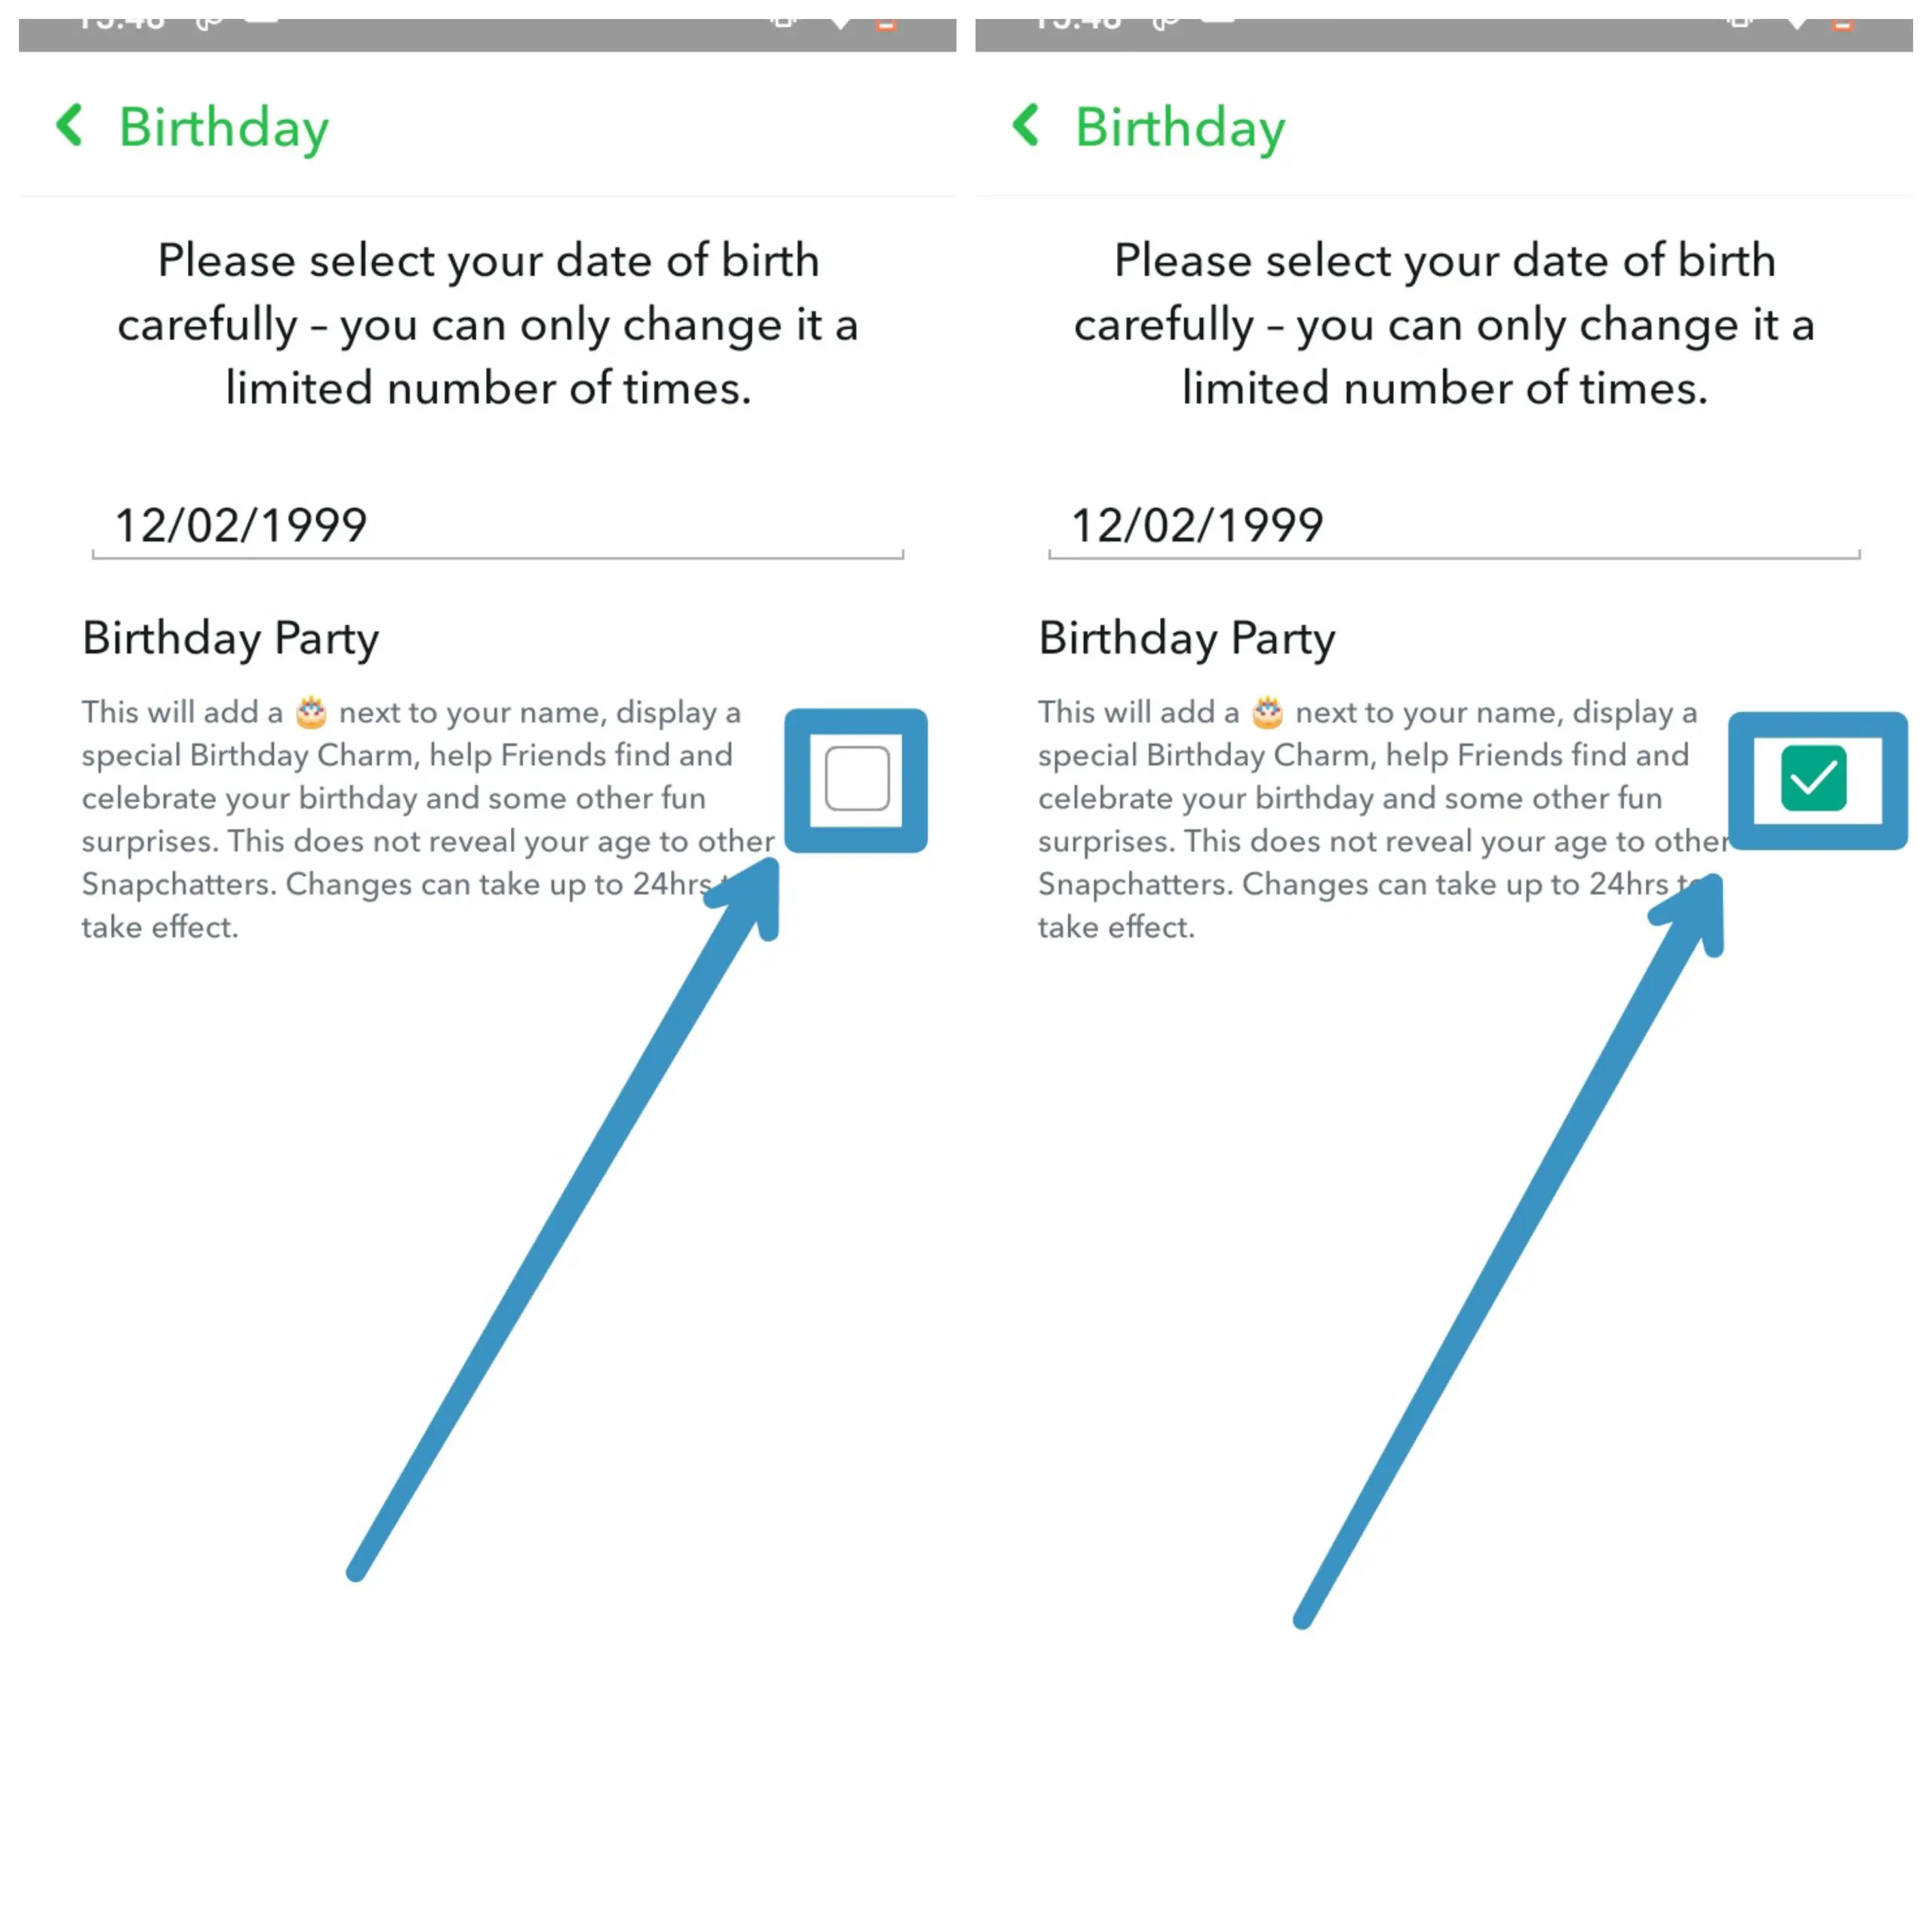 Step 6: Toggle Birthday Party On